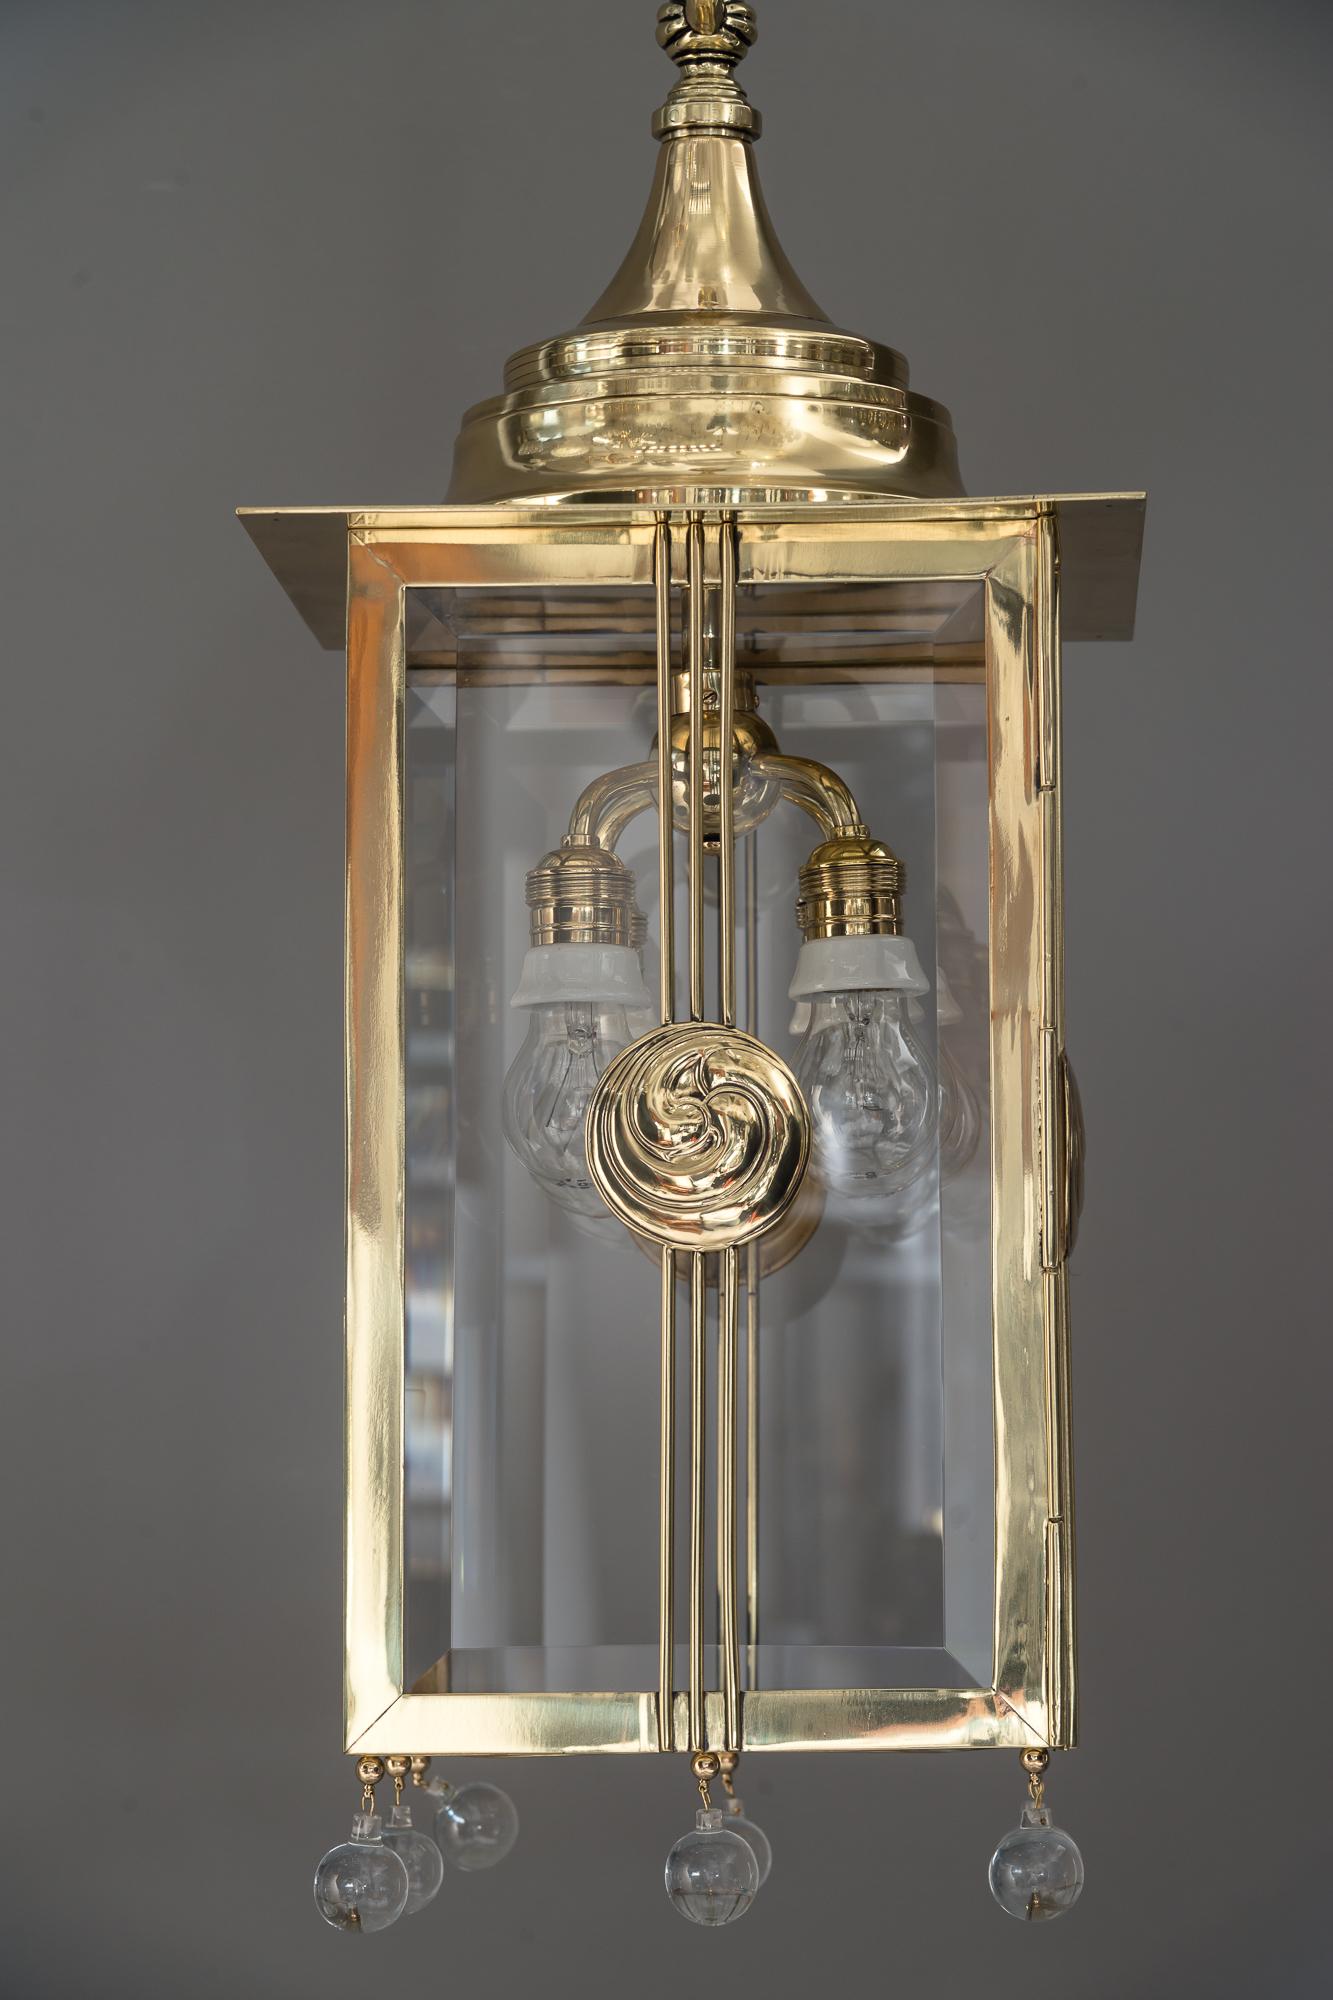 Big Jugendstil pendant with cut glasses, circa 1910s
Polished and stove enameled
The length of the chandelier is easy adjustable for rooms of differing heights.